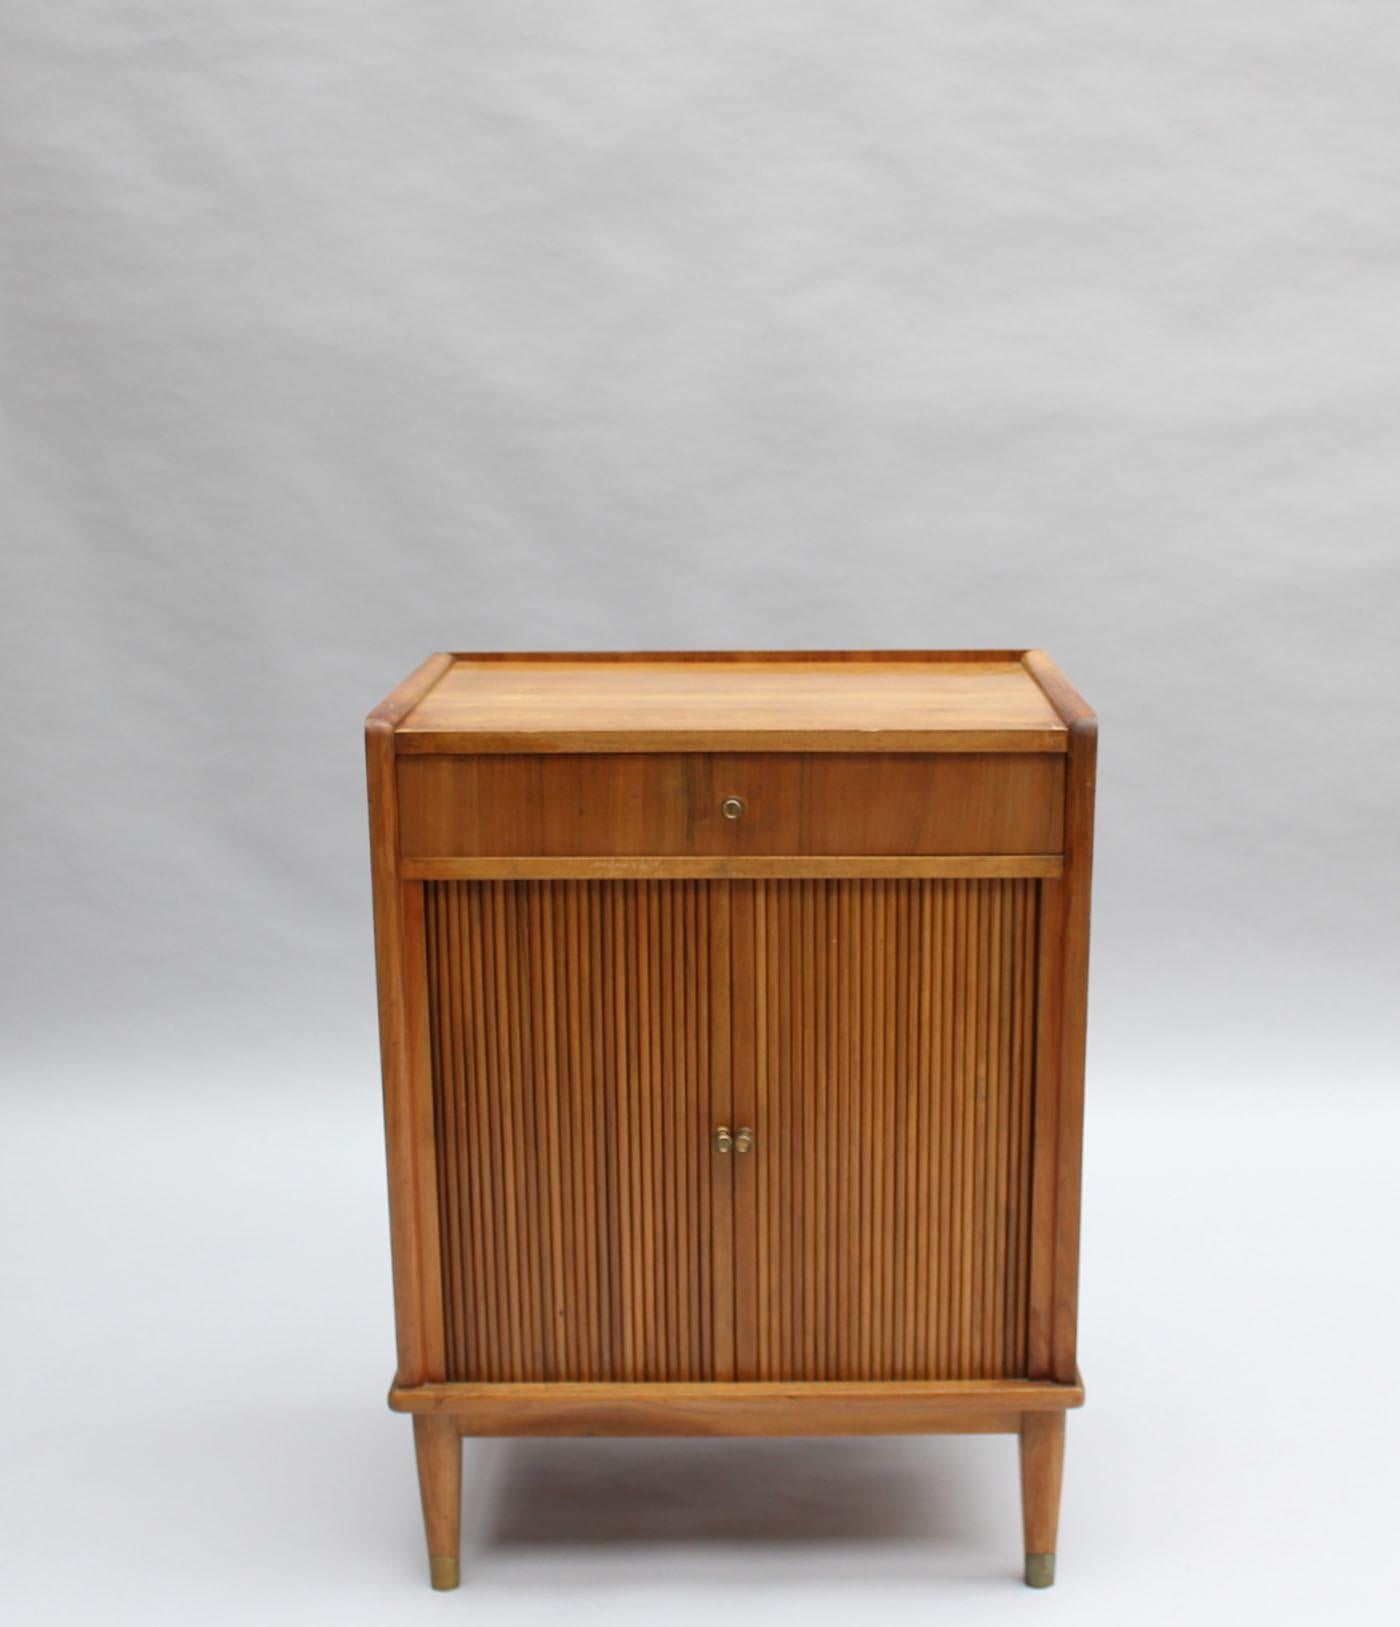 A fine French 1930s small music cabinet in walnut with 2 tambour doors, 1 drawer and bronze details.
Can also be used as a night stand or side table.